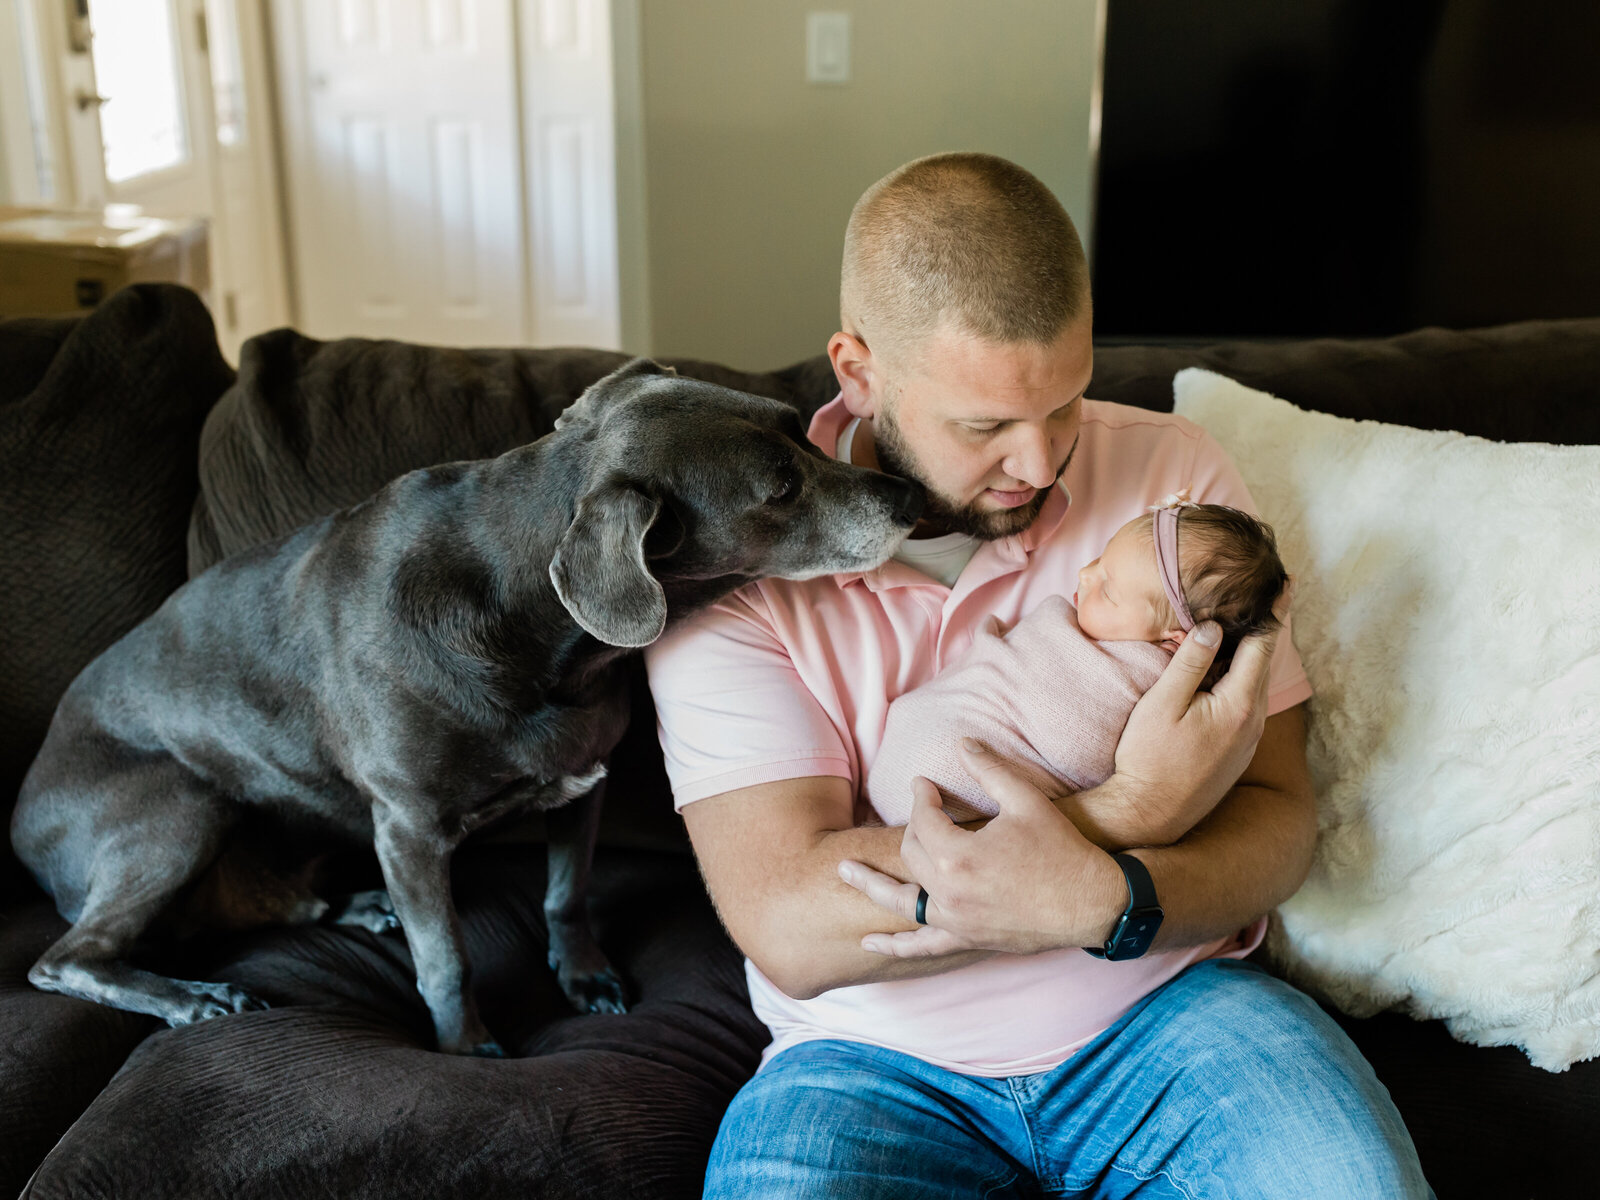 Newborn baby with dad and dog